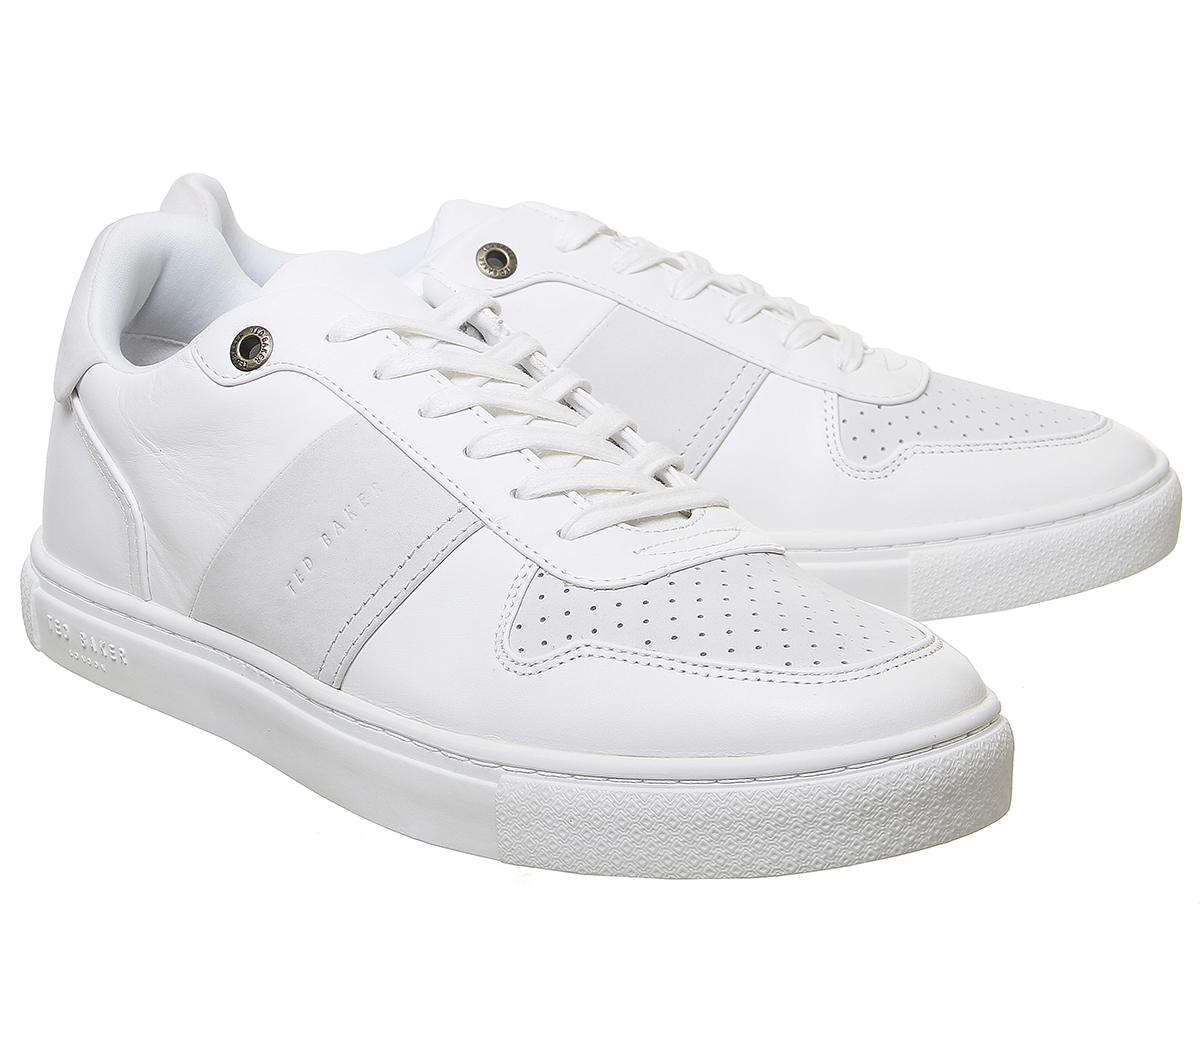 Ted Baker Coppin Trainers White - Men's Casual Shoes